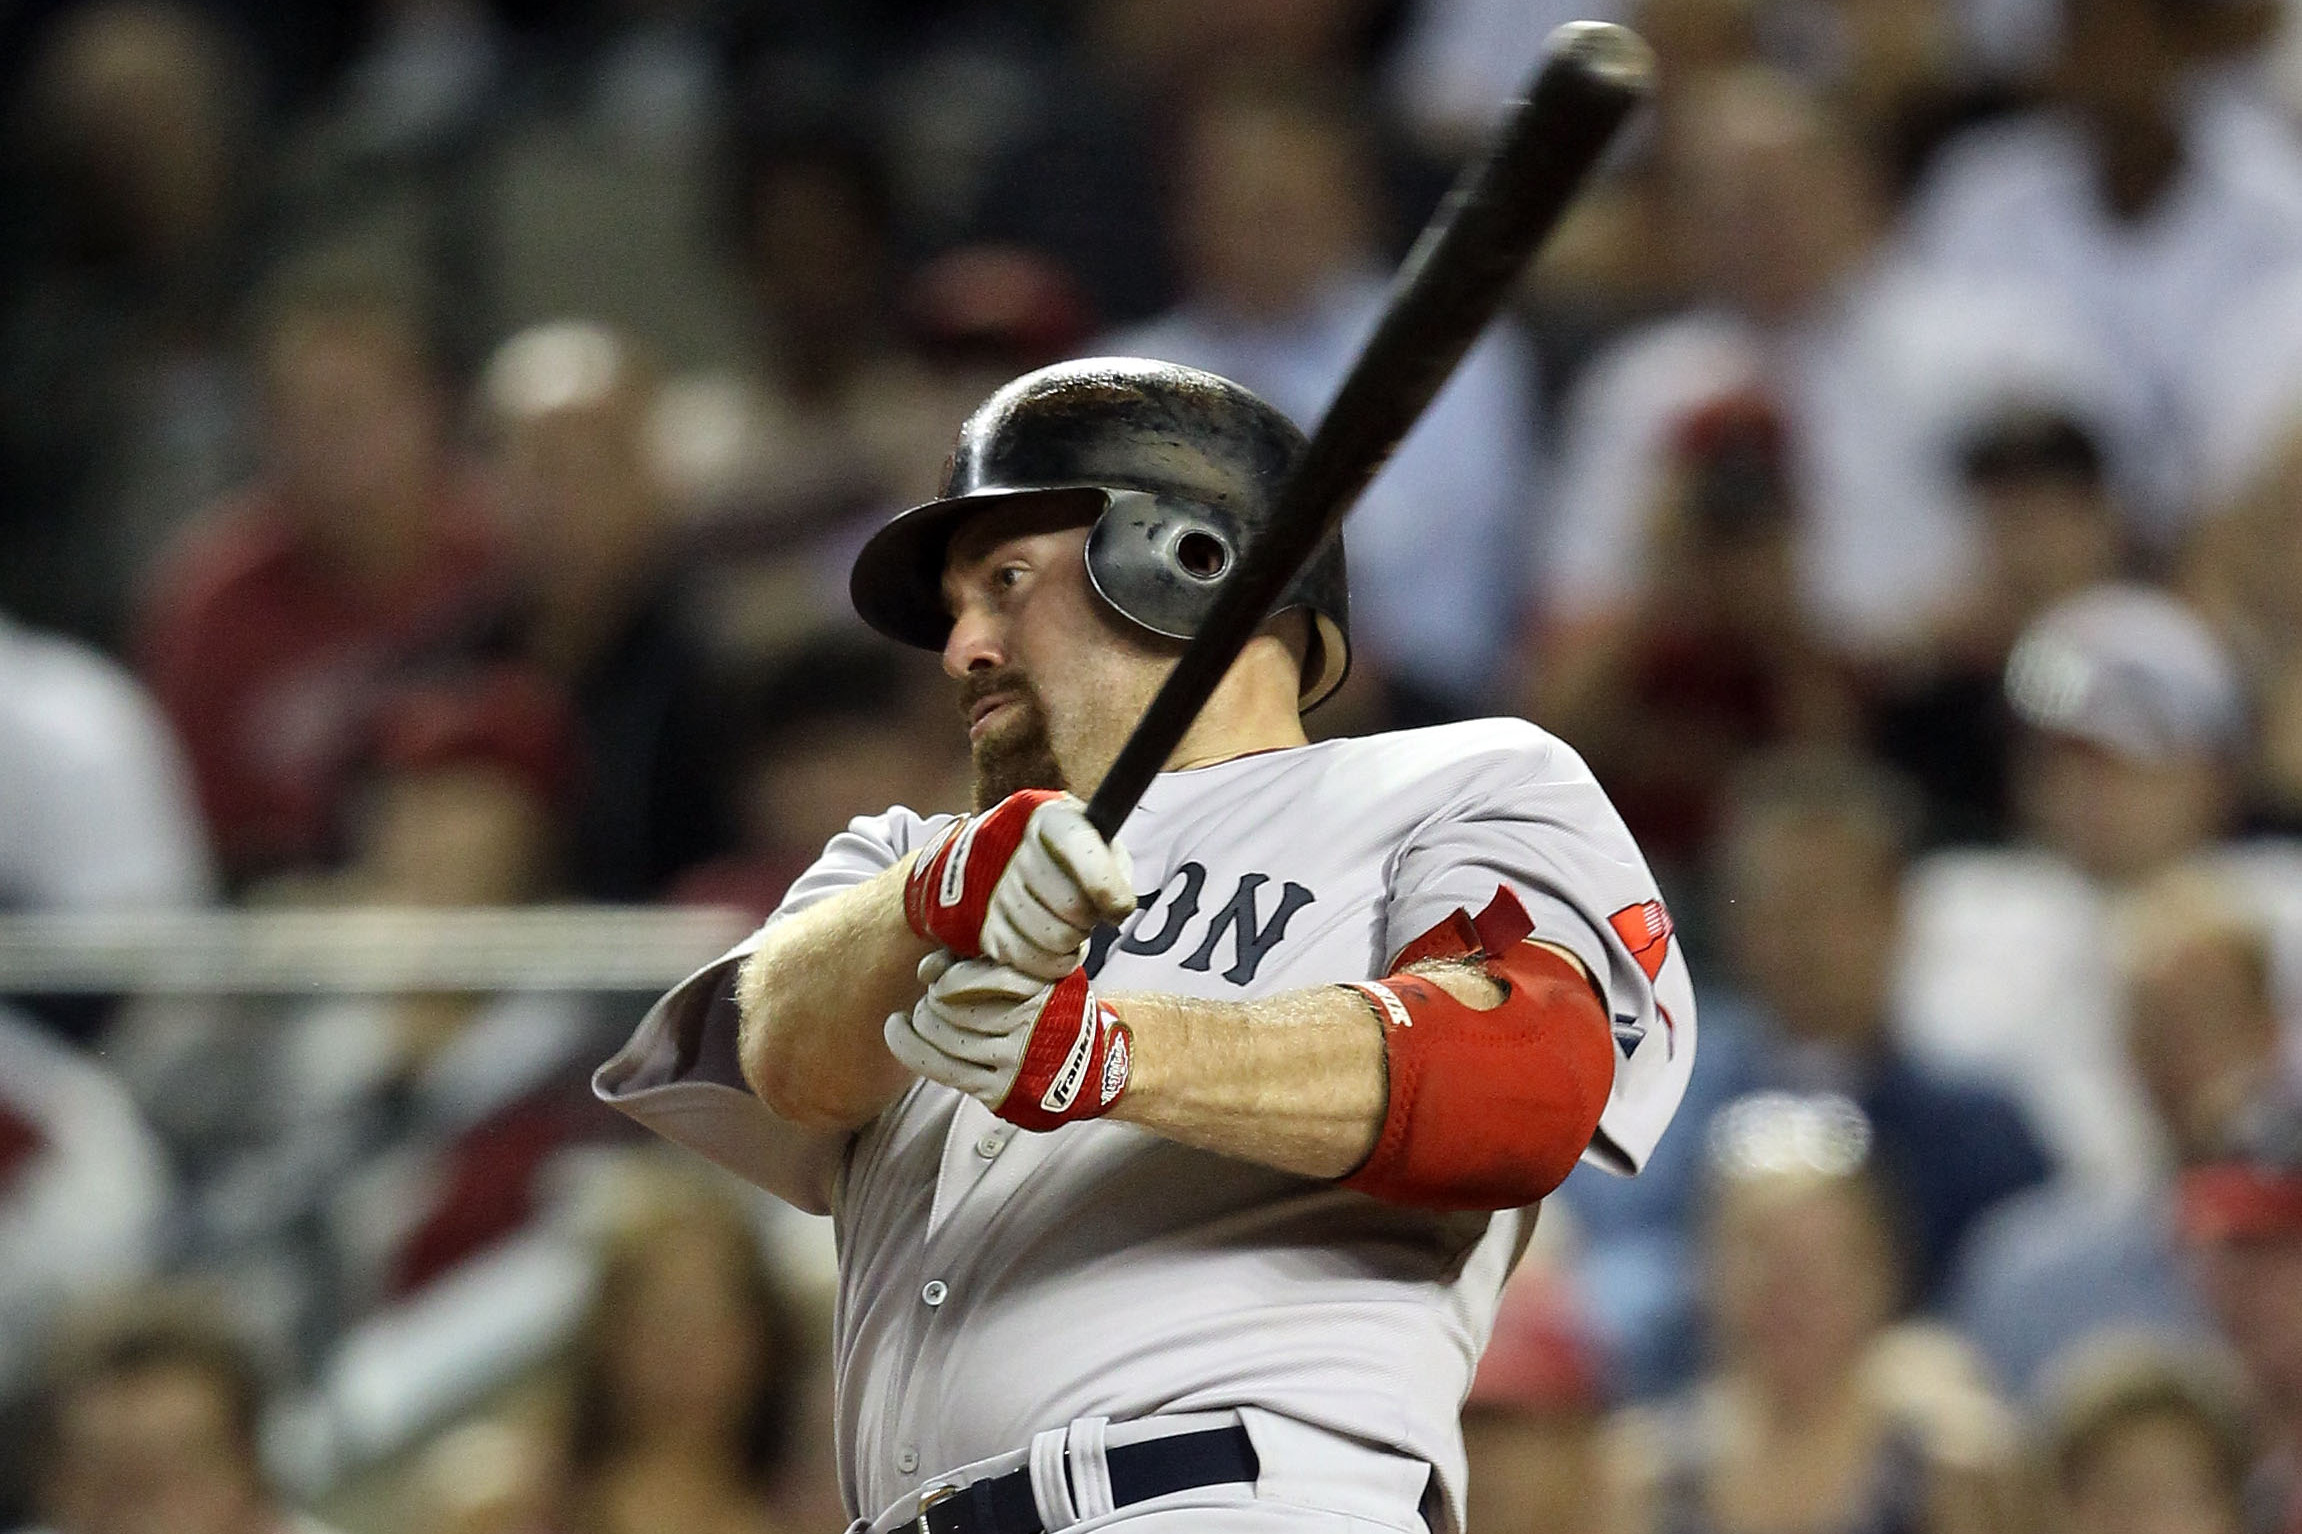 Rumors now point Red Sox 3B Kevin Youkilis to White Sox 